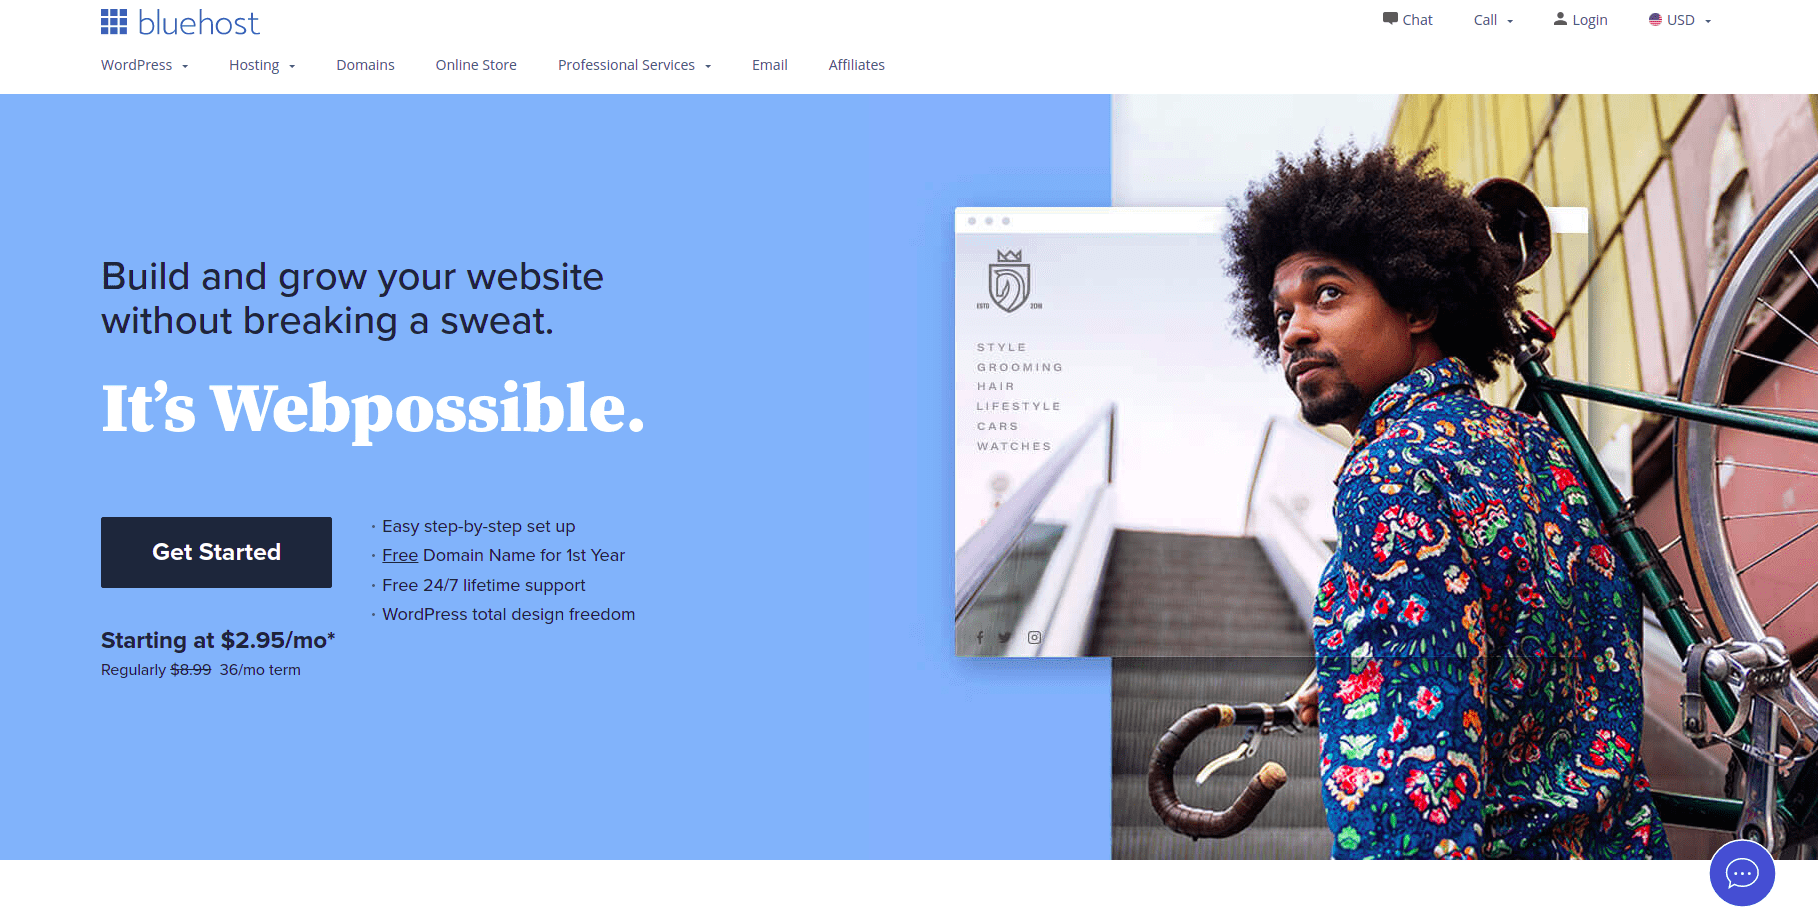 bluehost-homepage-2021